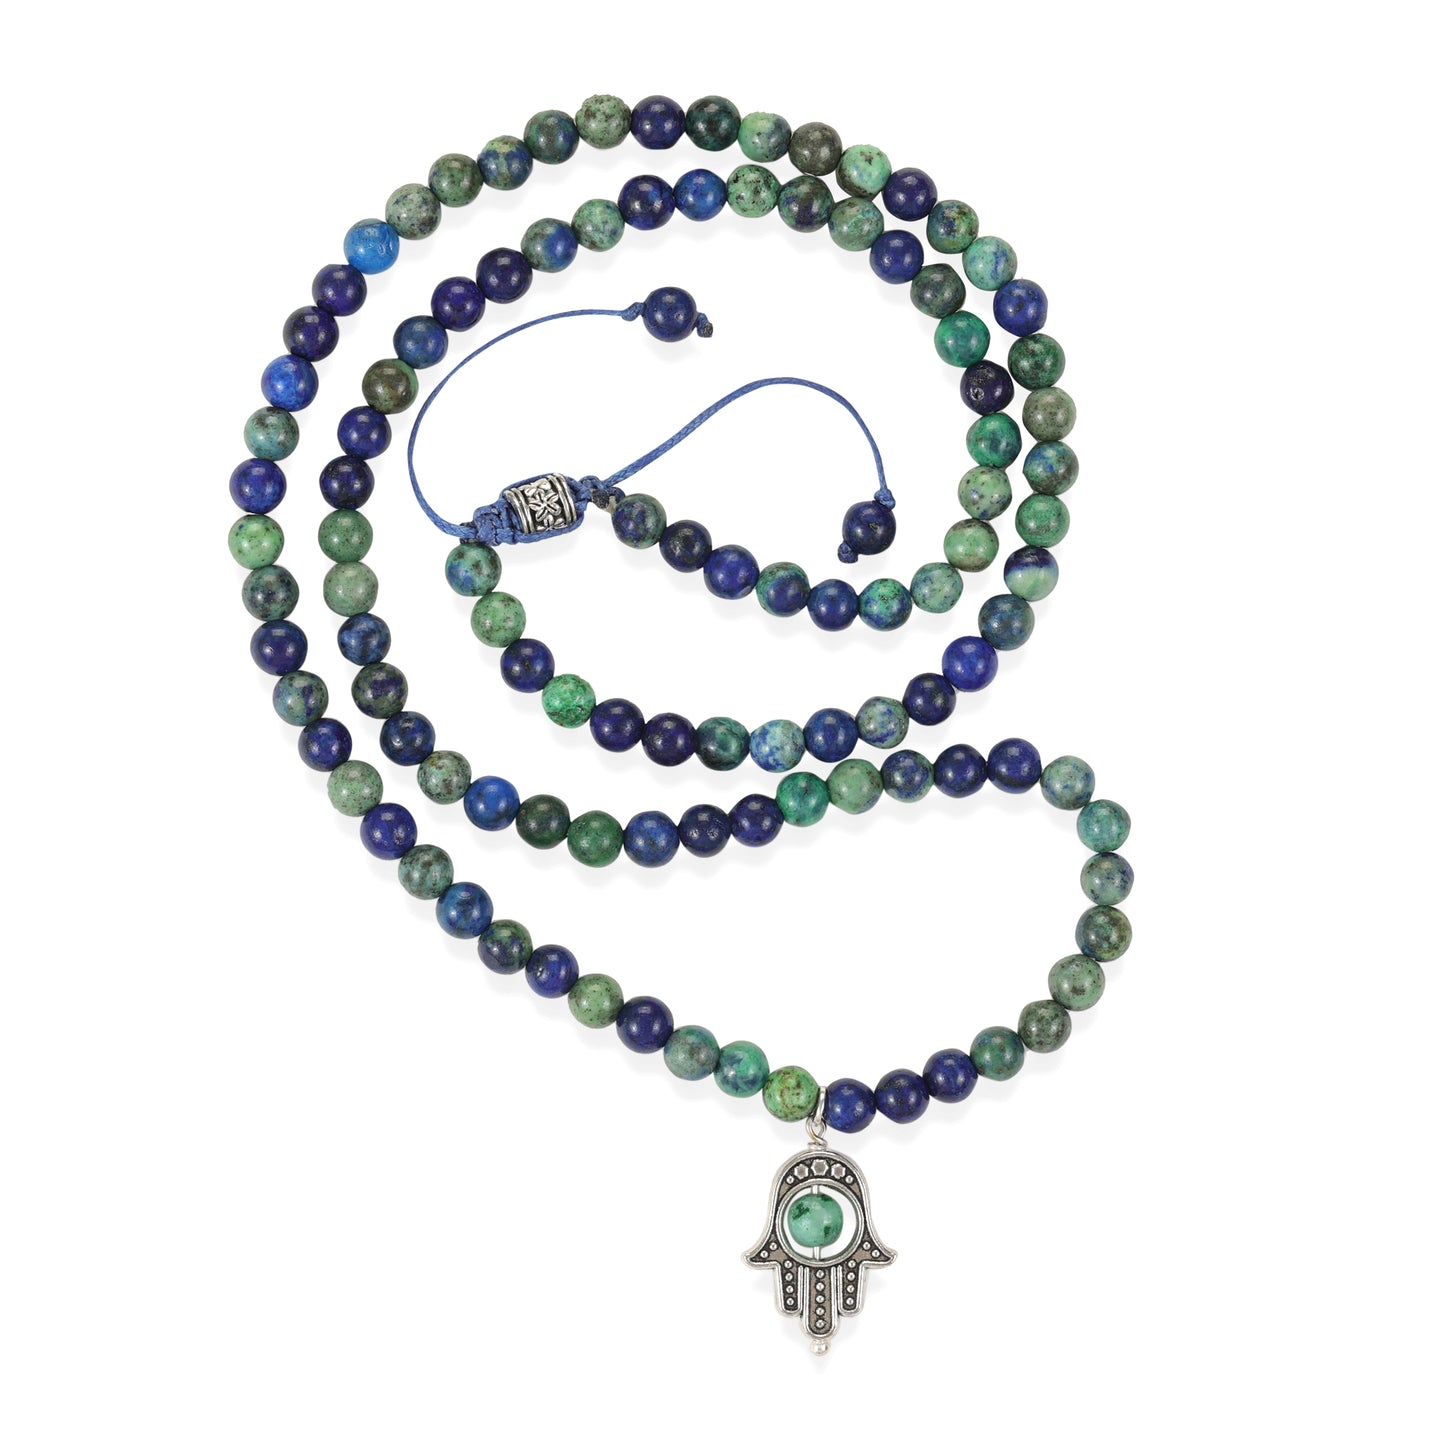 Chrysocolla 108 Beads Mala - Stone for Cleansing